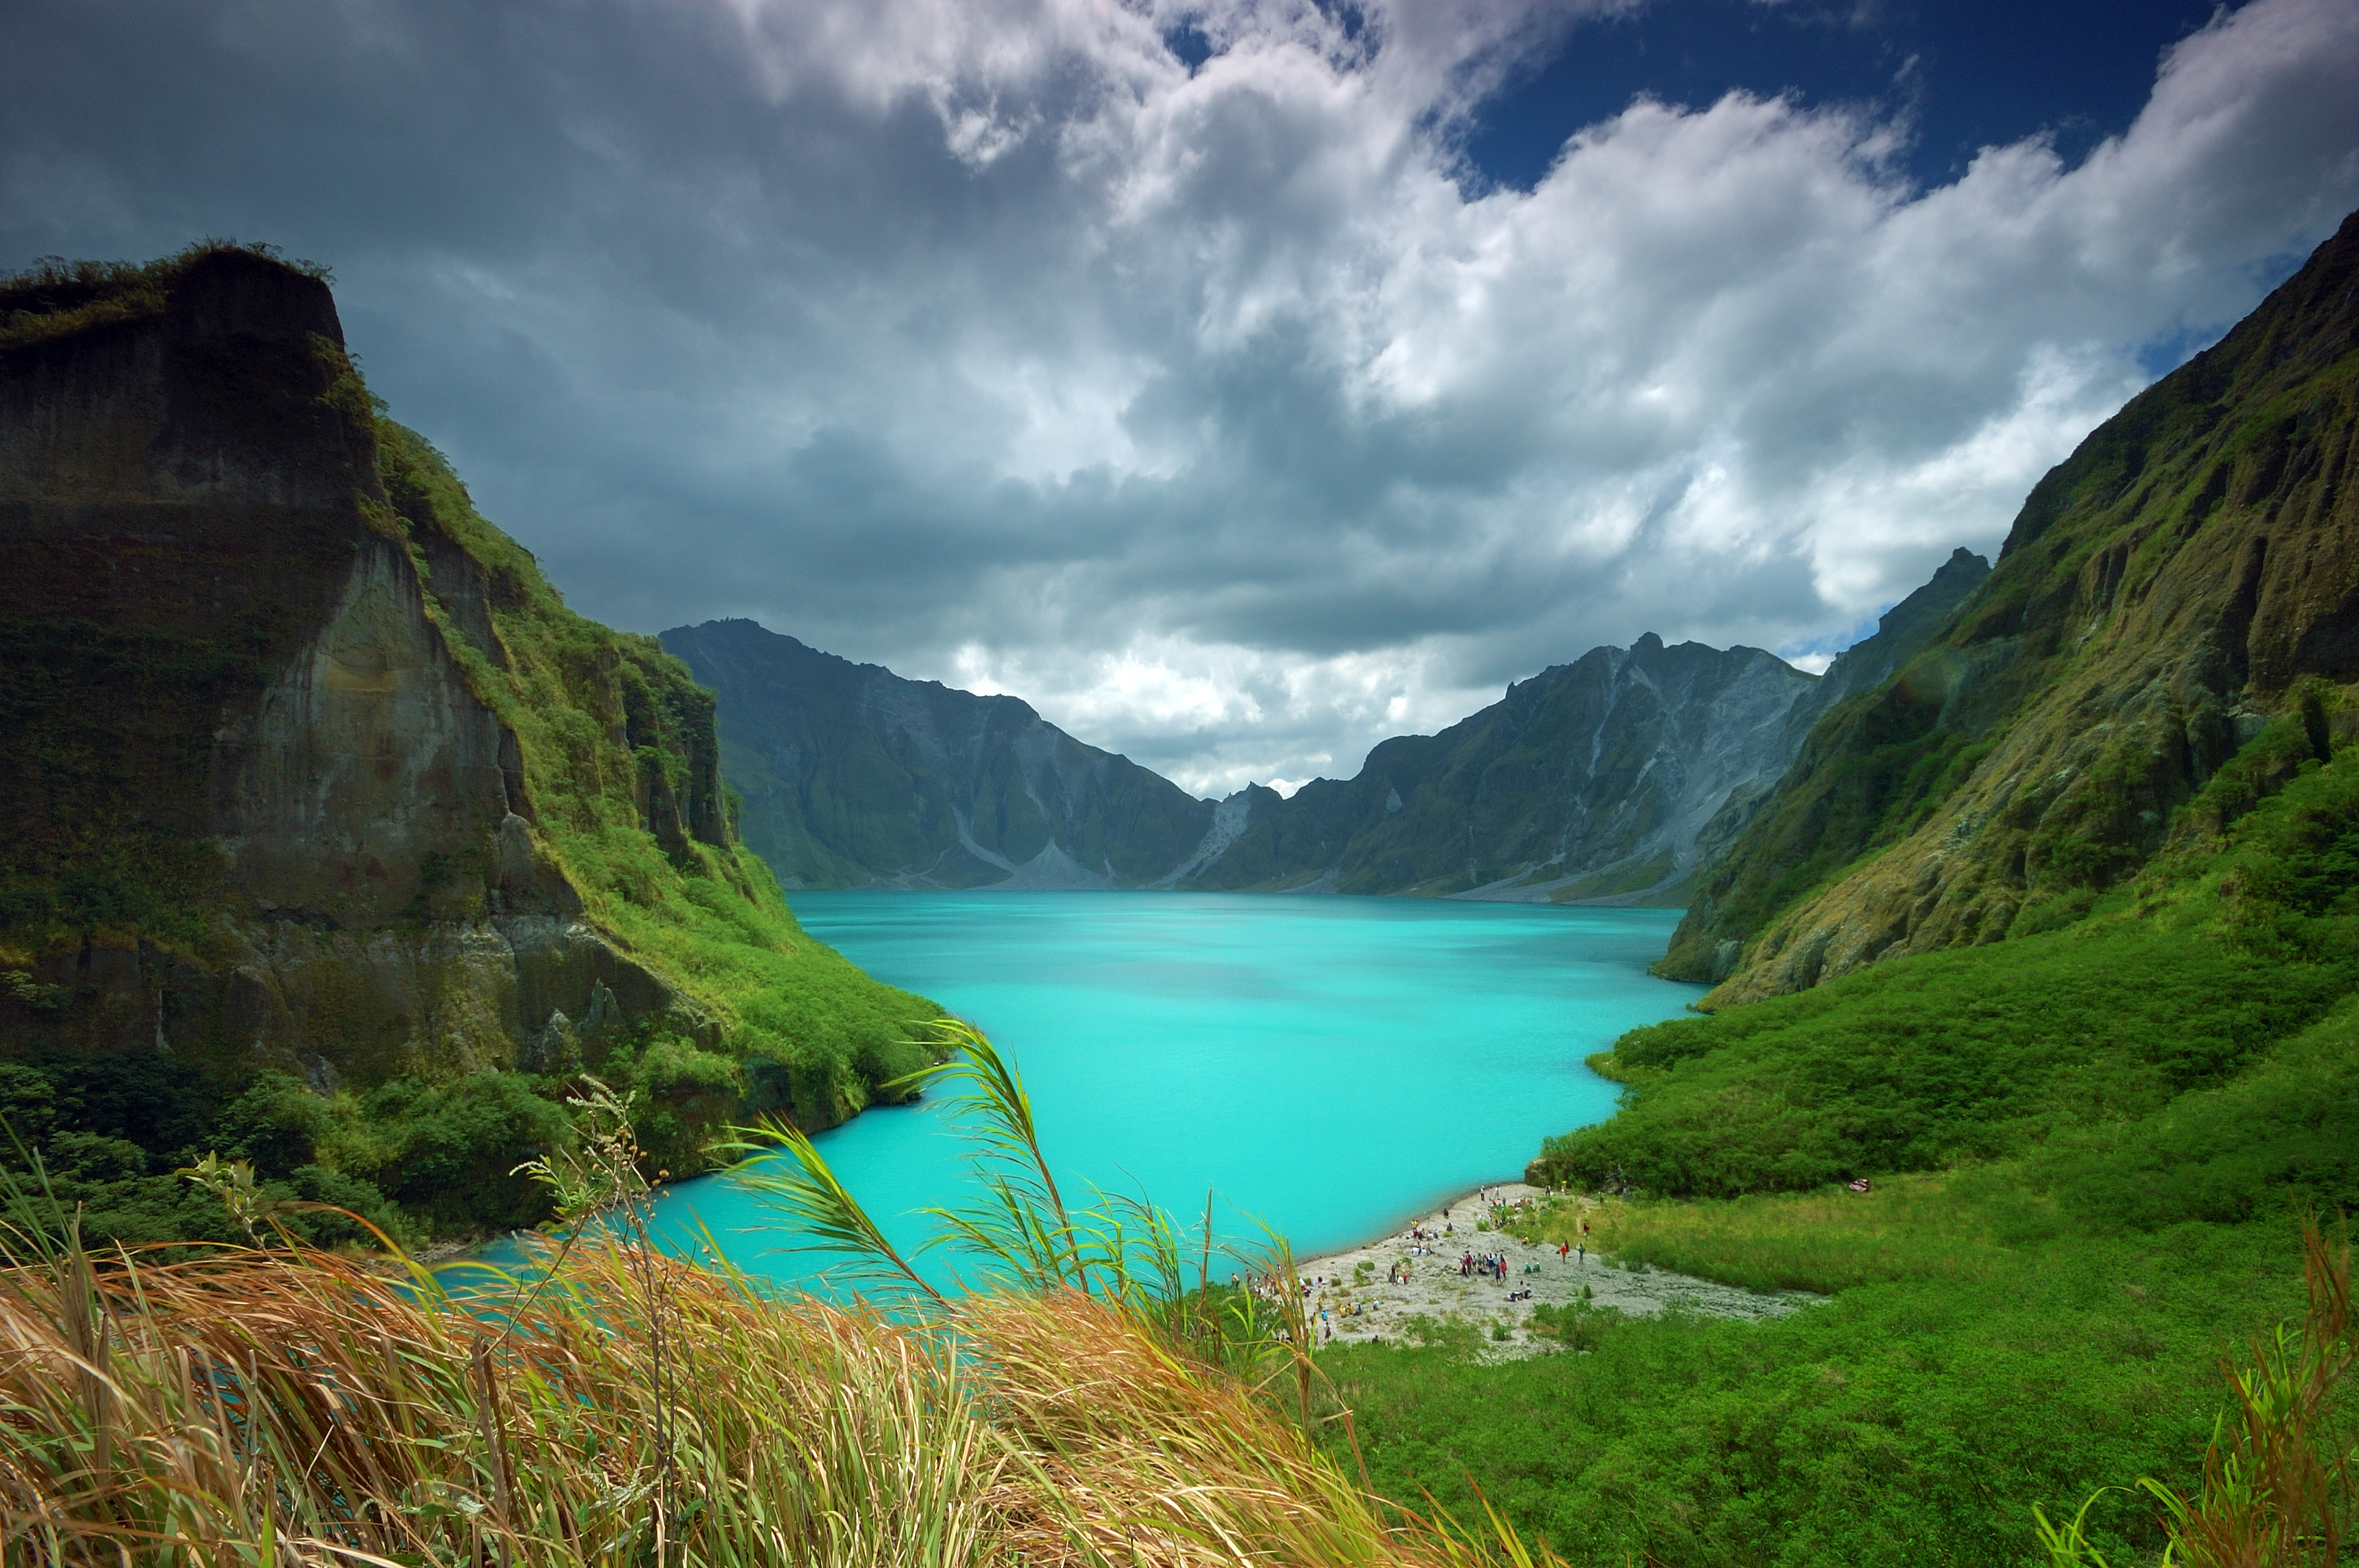 Blue waters of Mt. Pinatubo Crater Lake